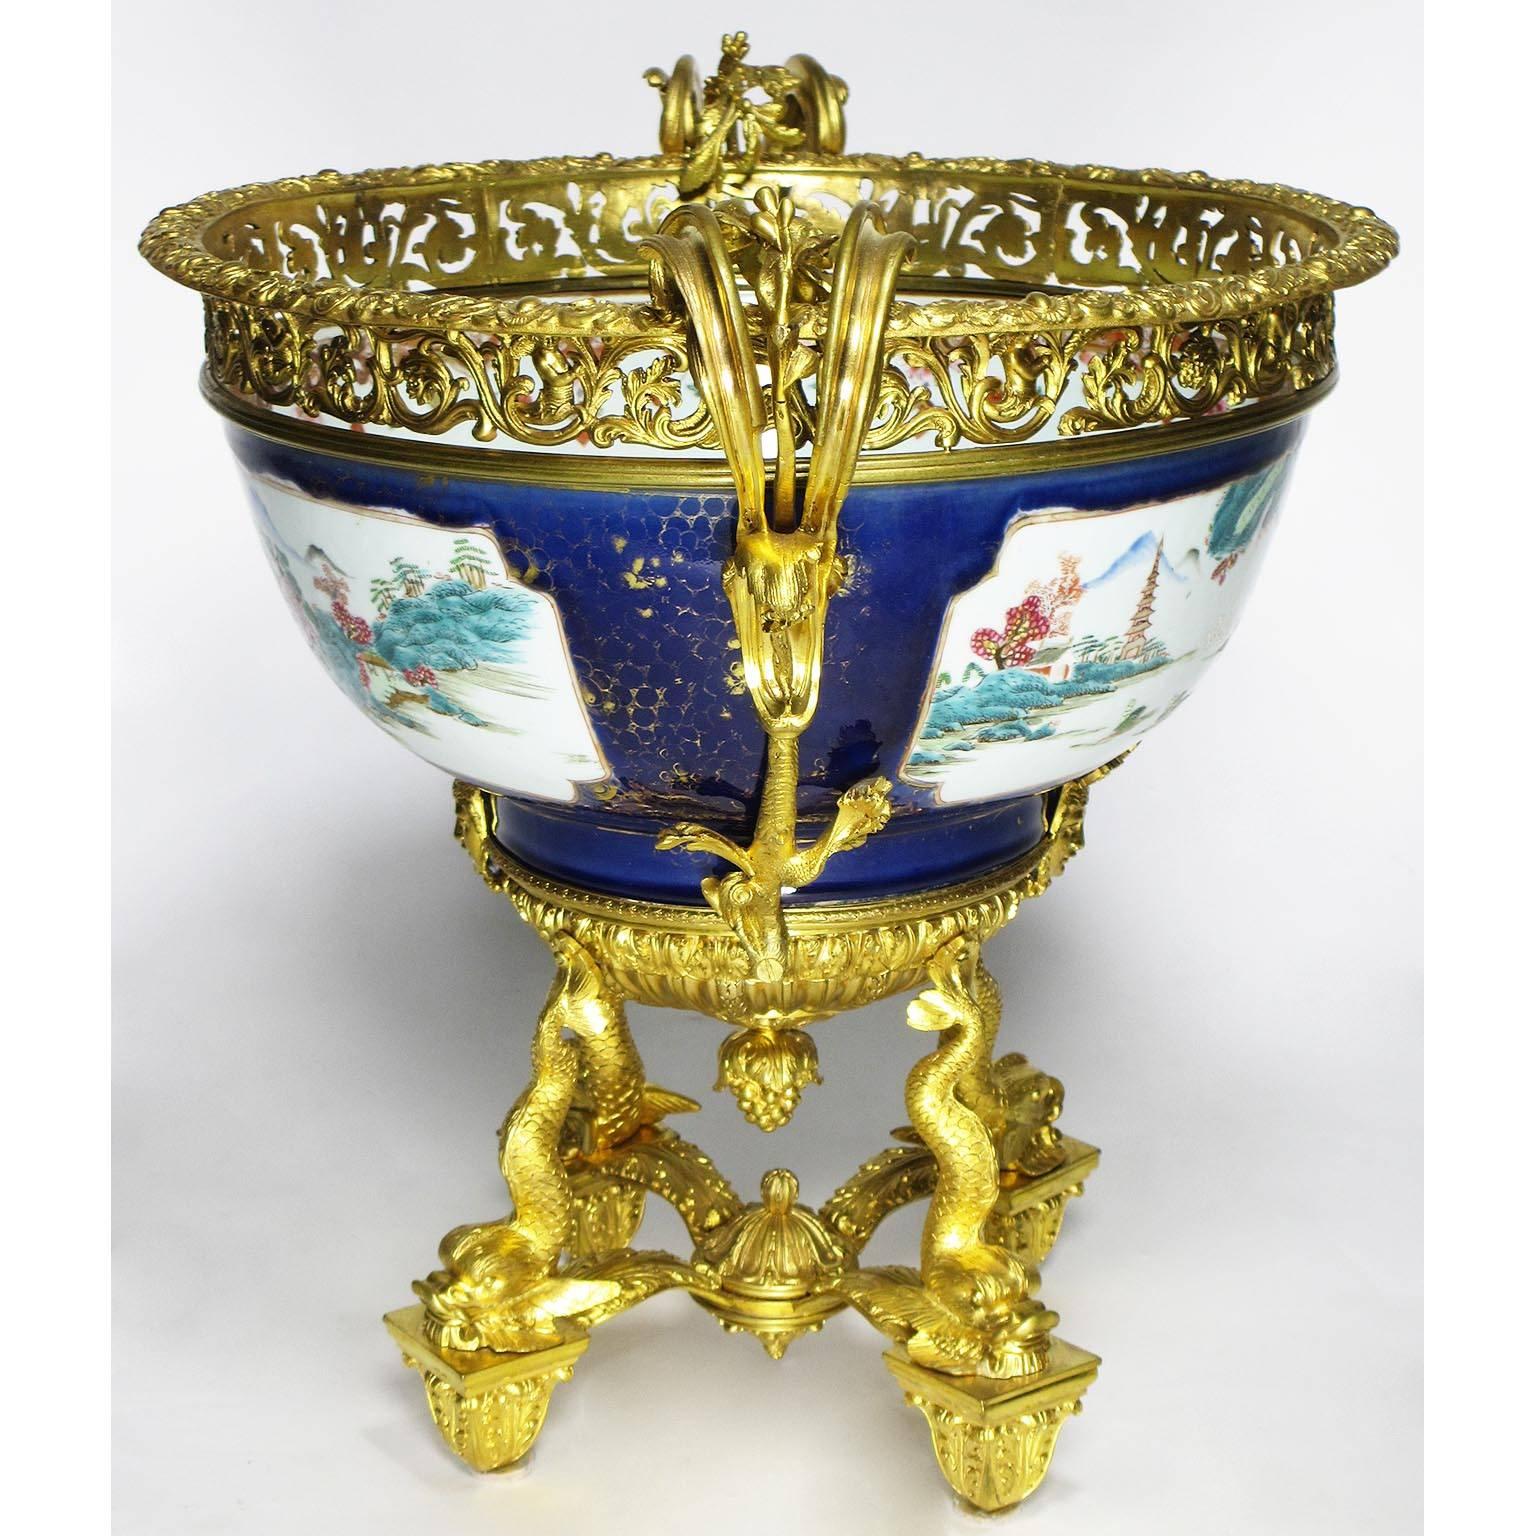 Painted Large 19th Century Chinese Porcelain and French Figural Ormolu Centerpiece For Sale